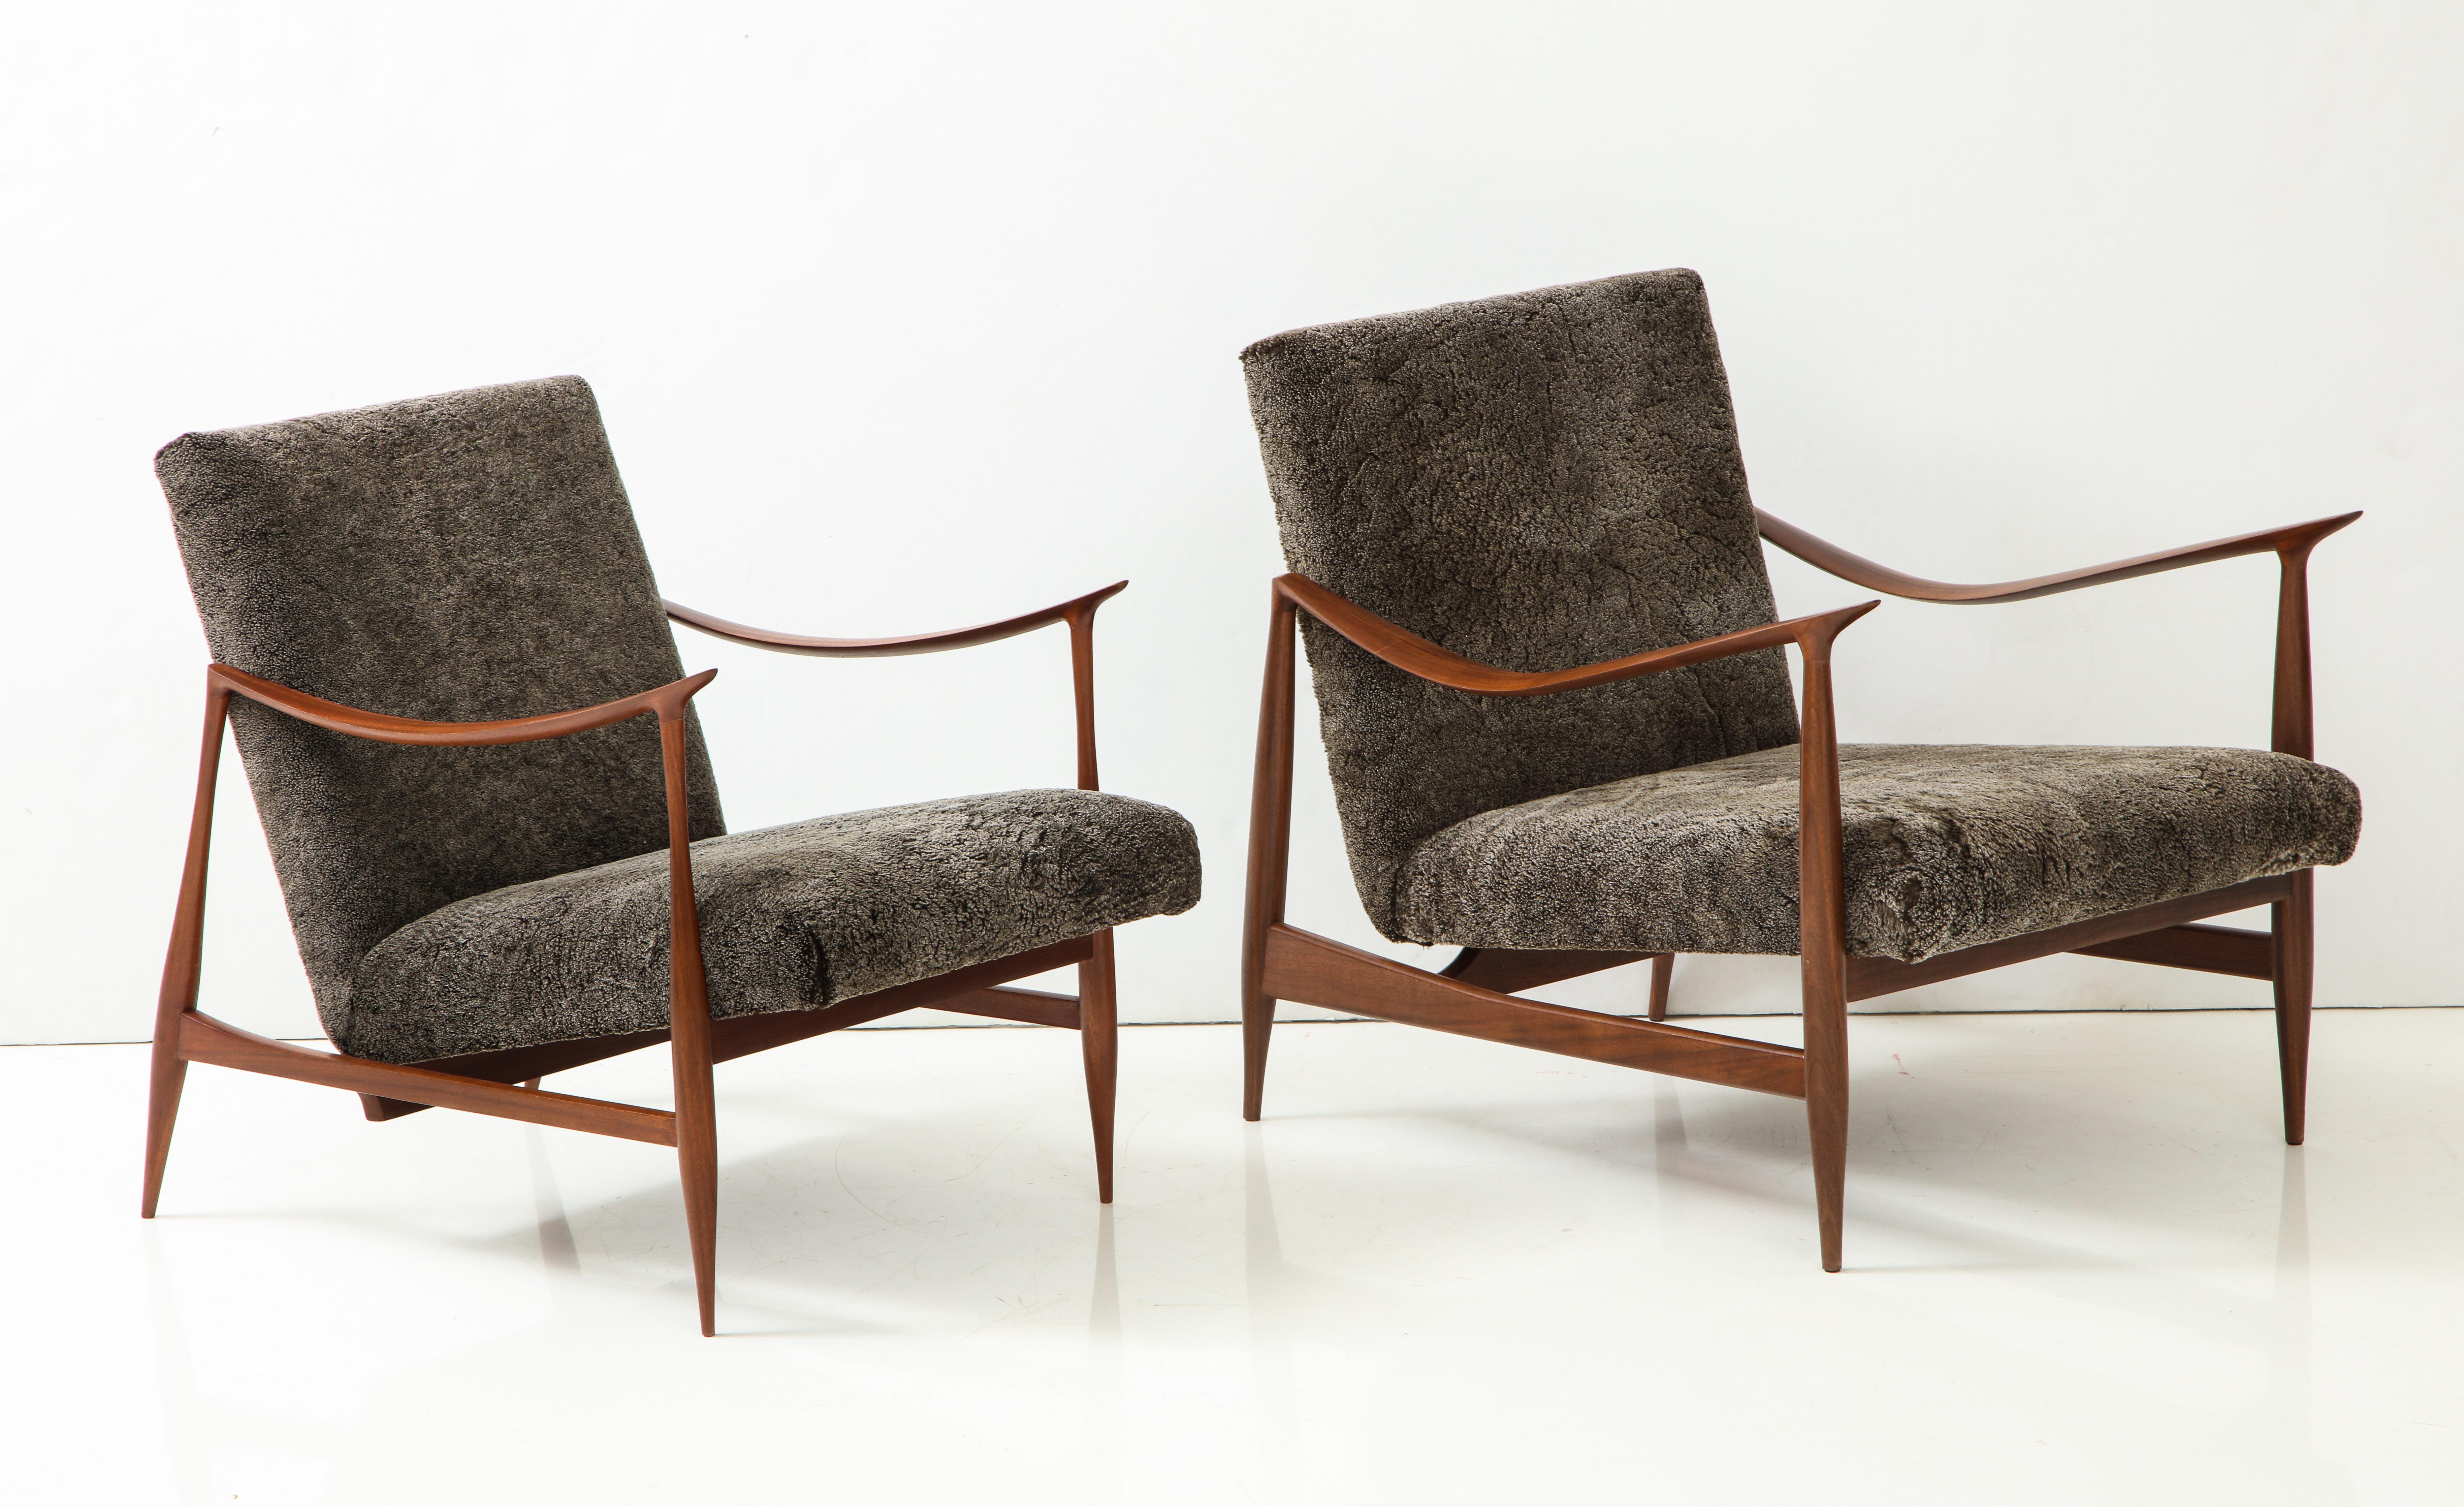 American Brazilian Style Lounge Chairs with Walnut Frames & Lamb's Wool Upholstery